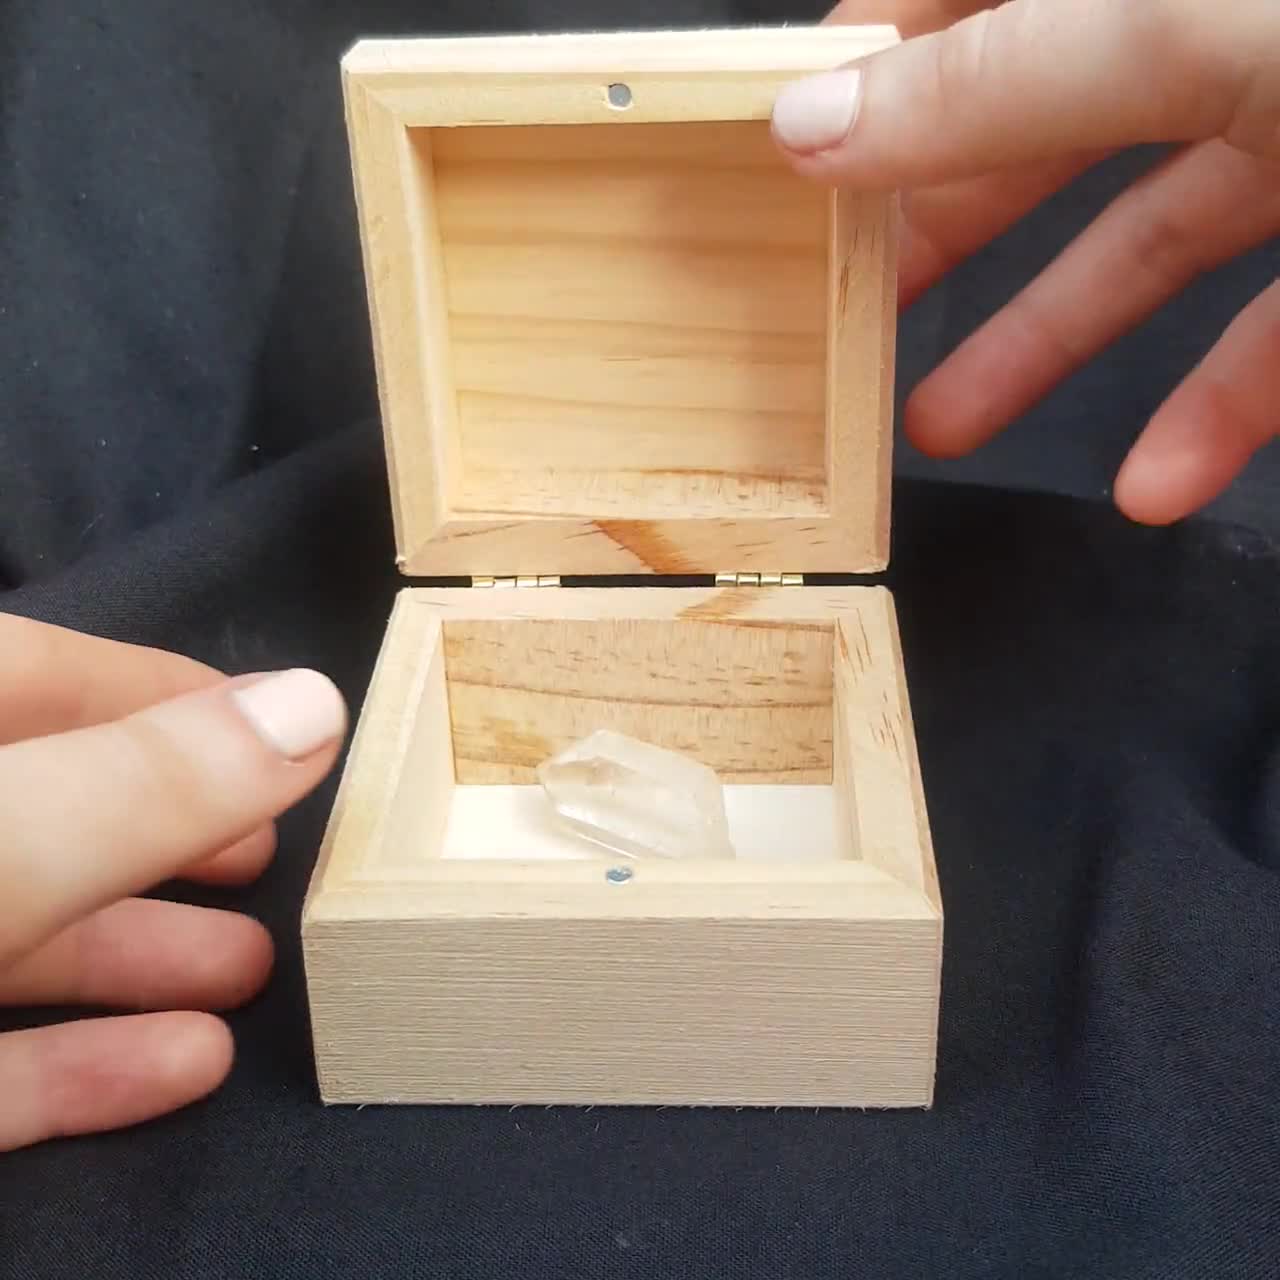 RB00015813 'Moon Cycle' Engagement Ring Box 